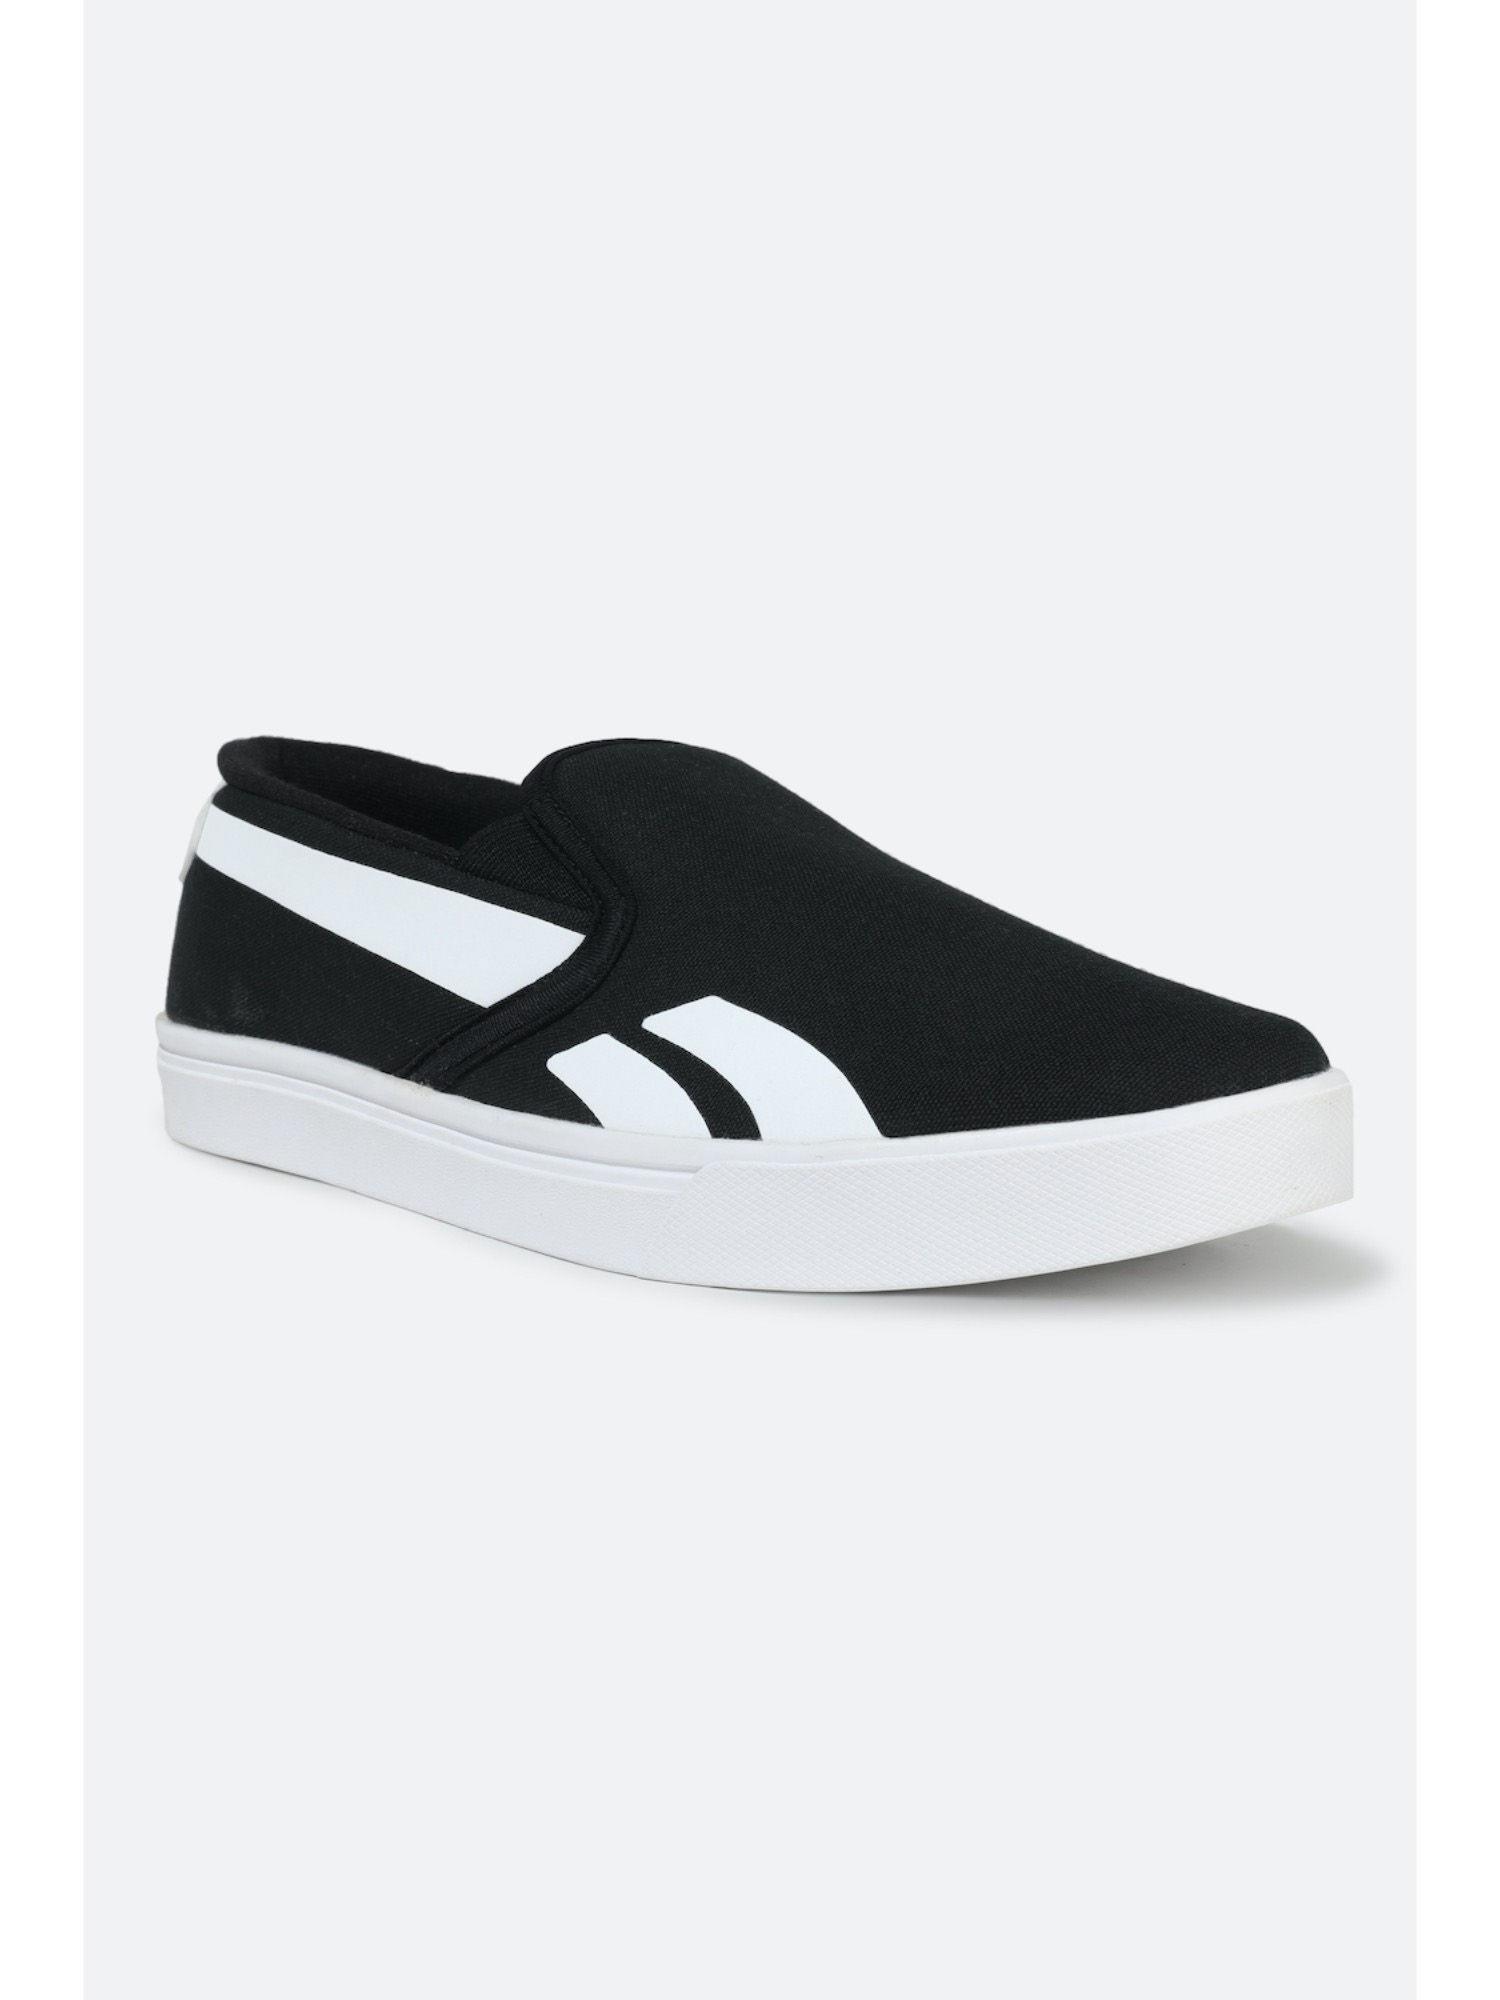 mens casual classic slip on sneaker shoes